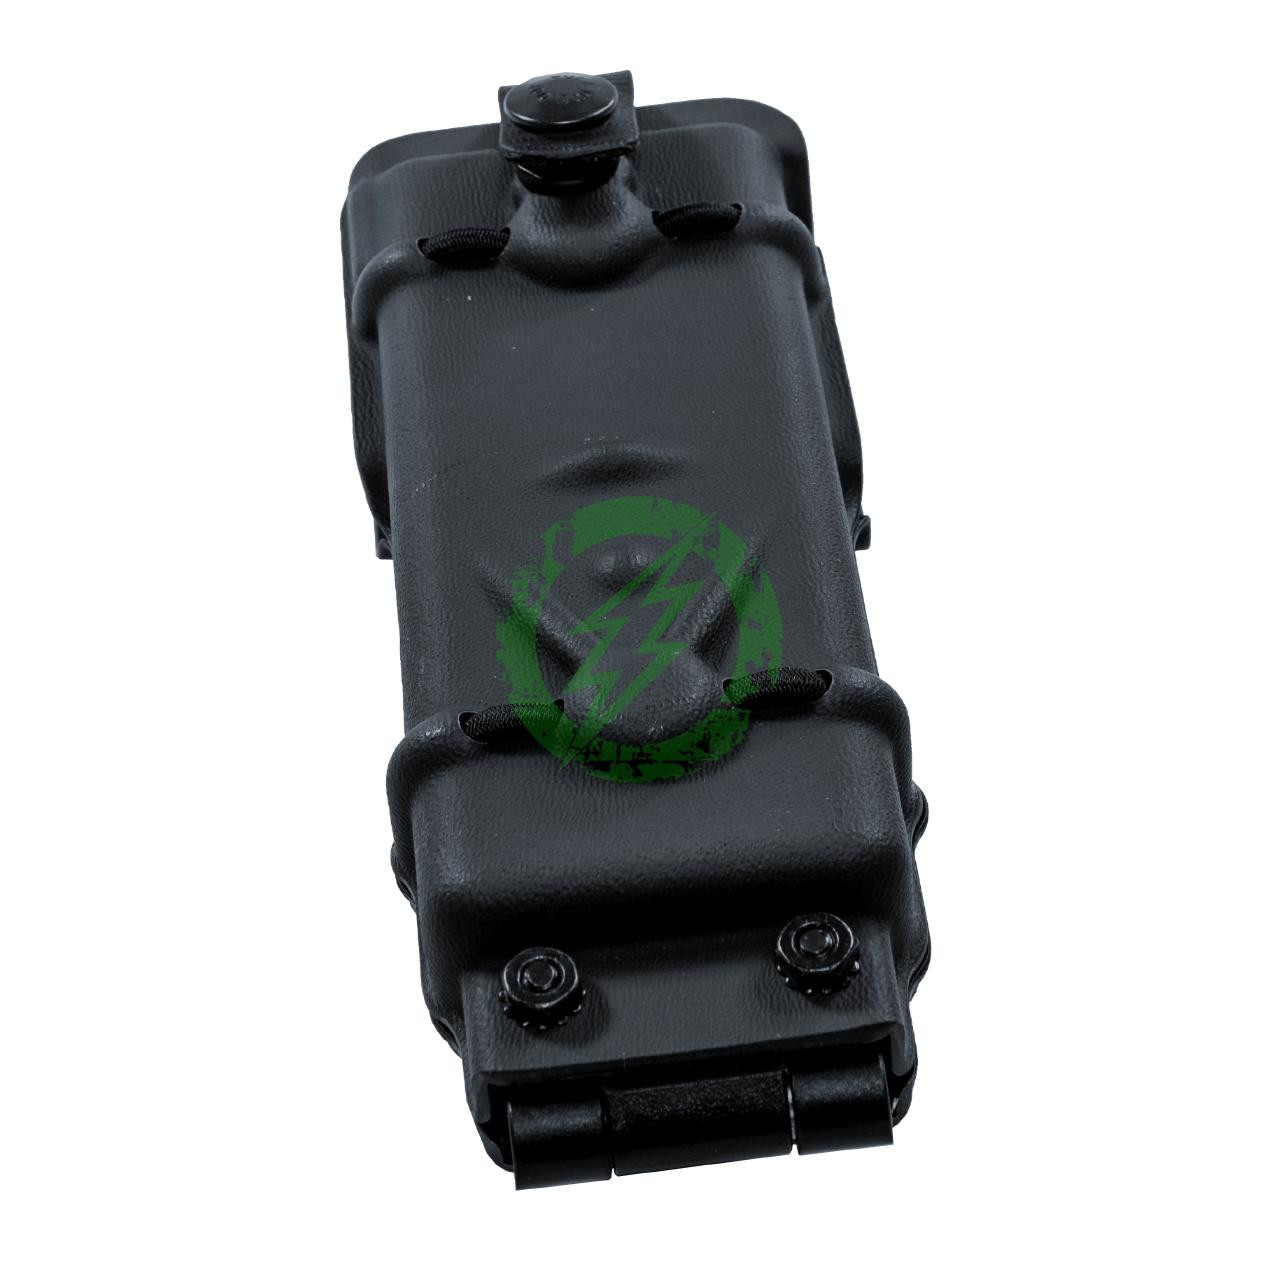  MC Kydex RACC for UV-5R Extended Battery | Black, OD Green, Coyote Brown 